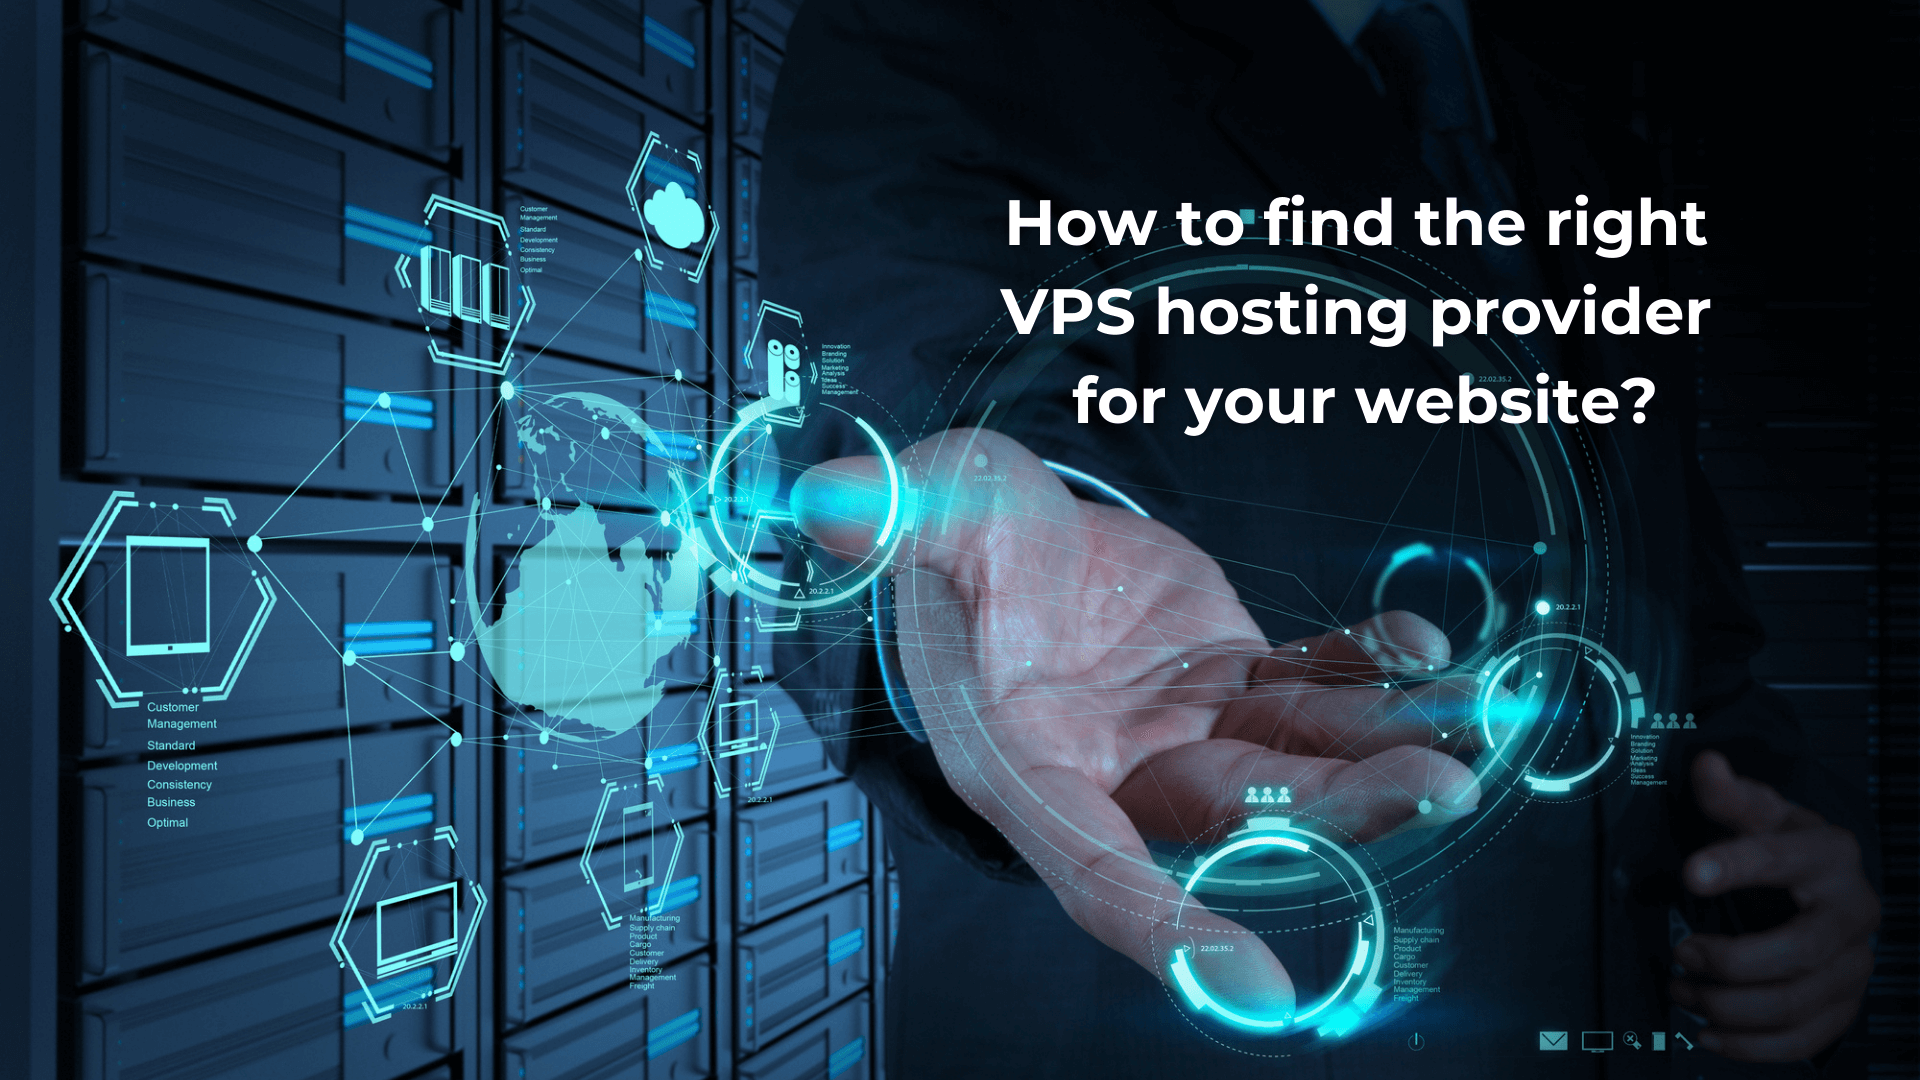 How-to-find-the-right-VPS-hosting-provider-for-your-website_-1